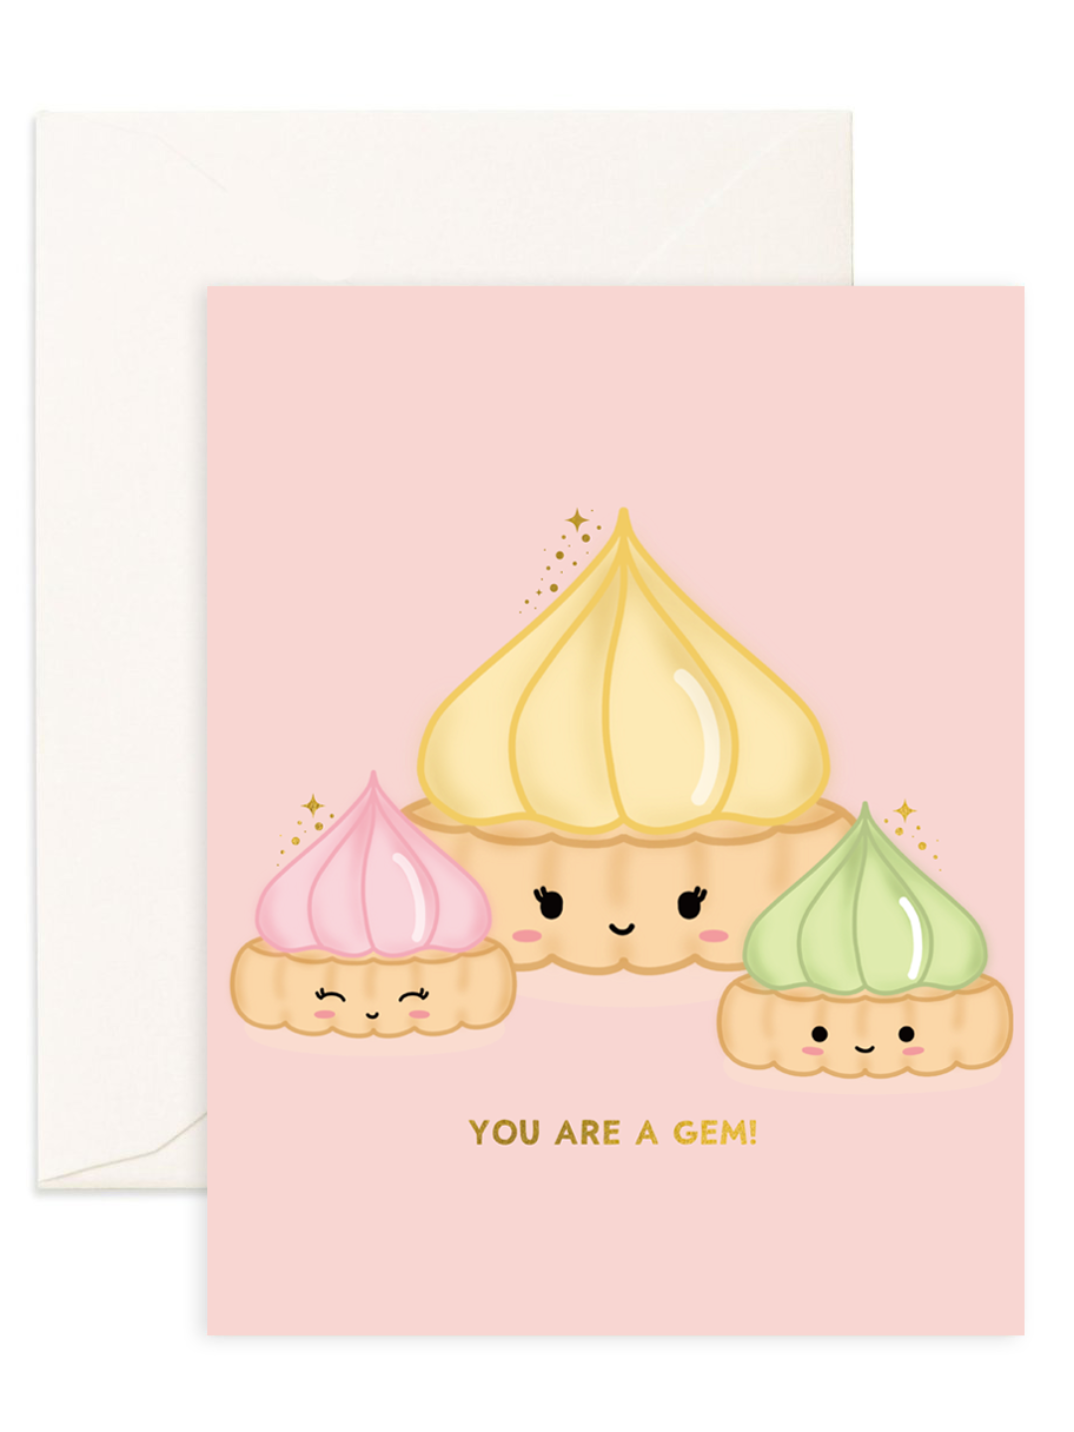 Hong Kong greeting card printed on recycled paper shop eco-friendly gift greeting card for friends really cute design for foodies meringue tarts dessert lover